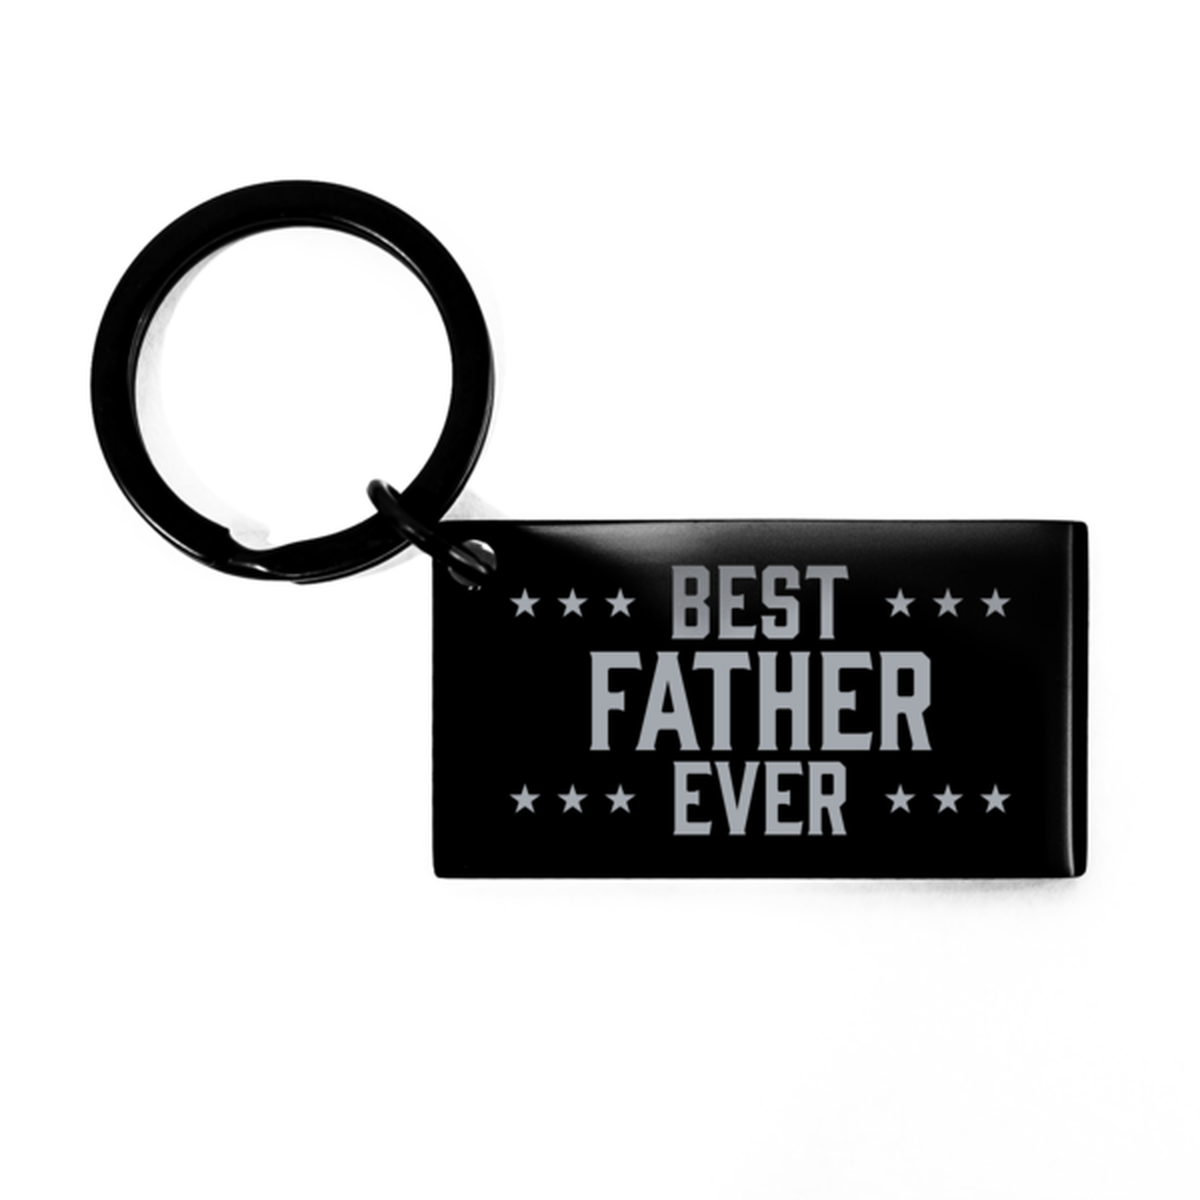 Best Father Ever Father Gifts, Funny Black Keychain For Father, Birthday Engraved Keyring Presents For Men